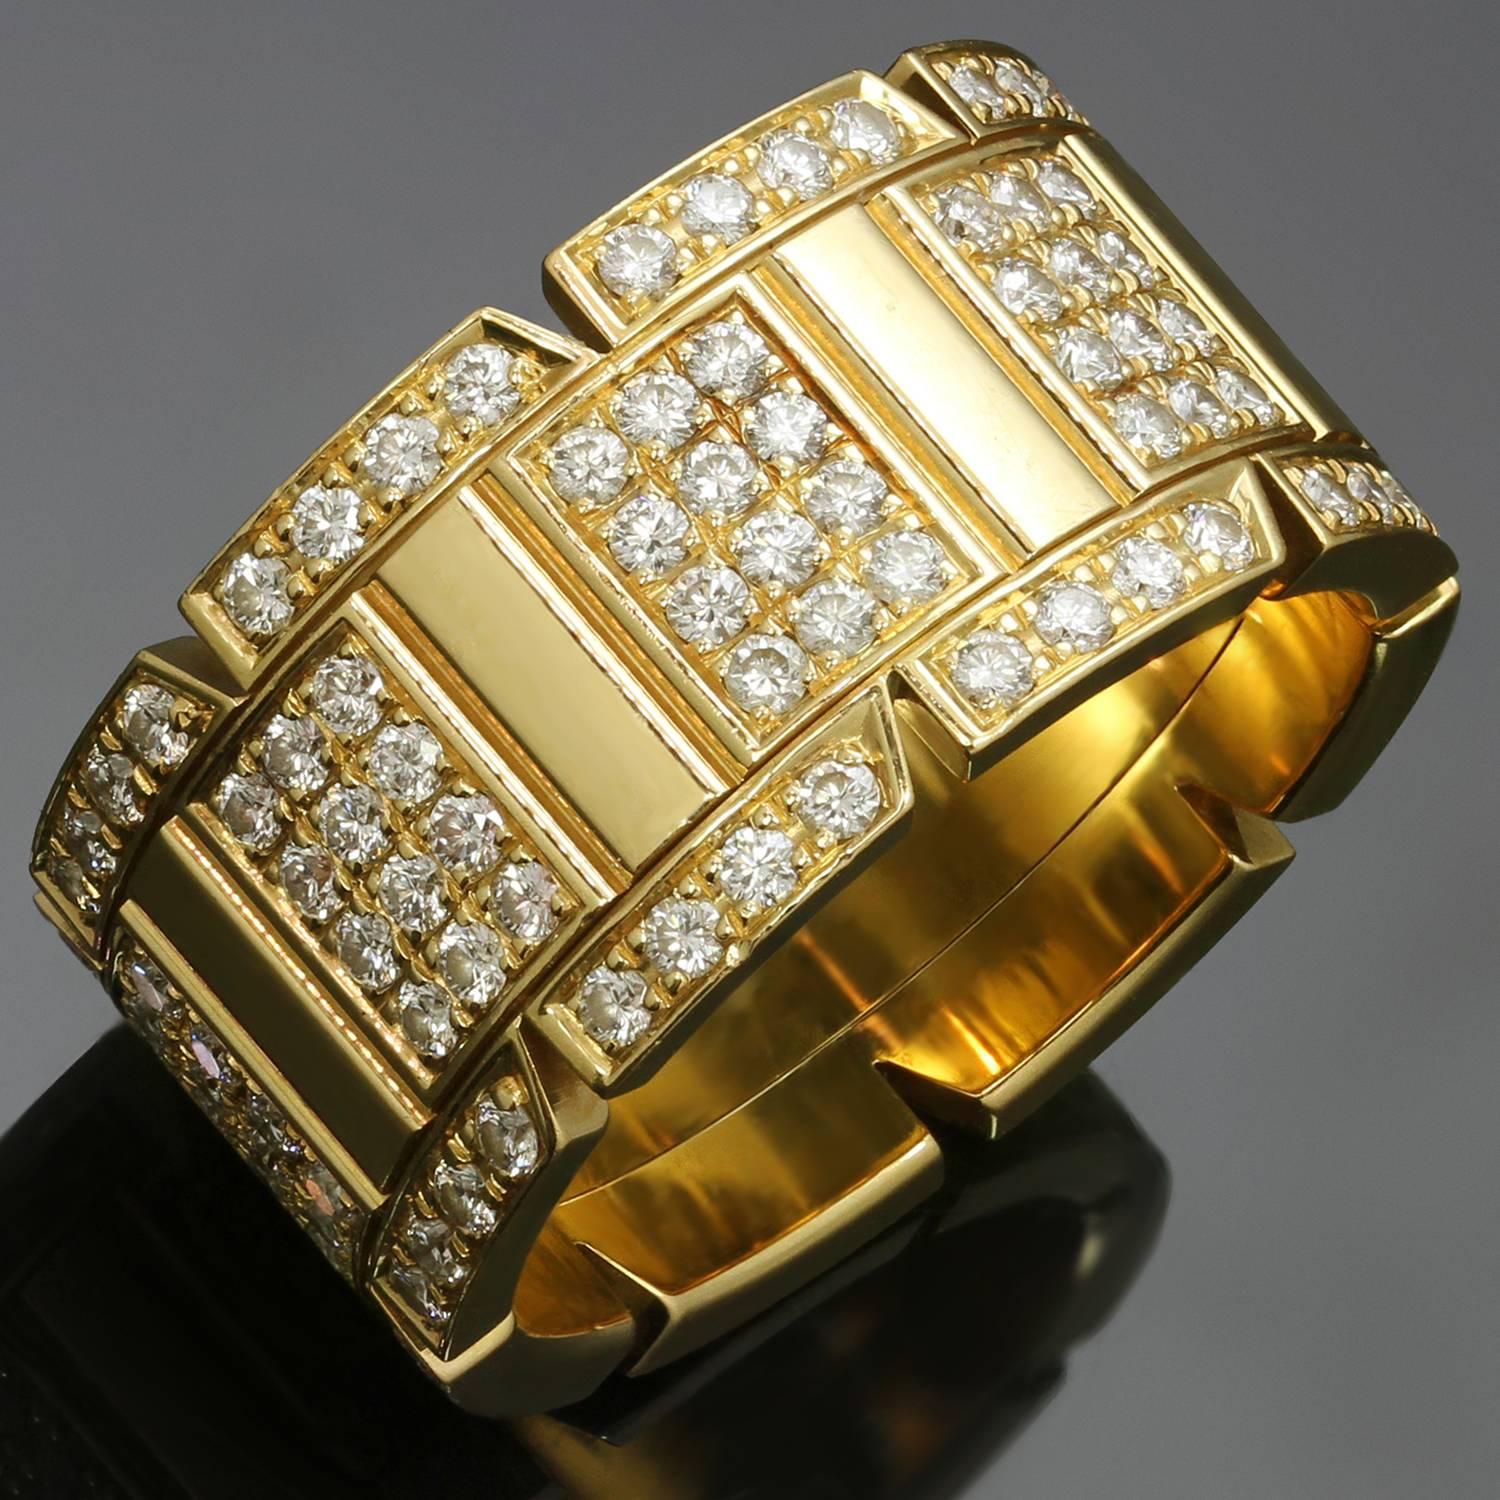 This iconic ring from Cartier's Tank Francaise collection is crafted in 18k yellow gold and set with about 160 brilliant-cut round diamonds of an estimated 2.50 carats. Made in France circa 1999s. Measurements: 0.43